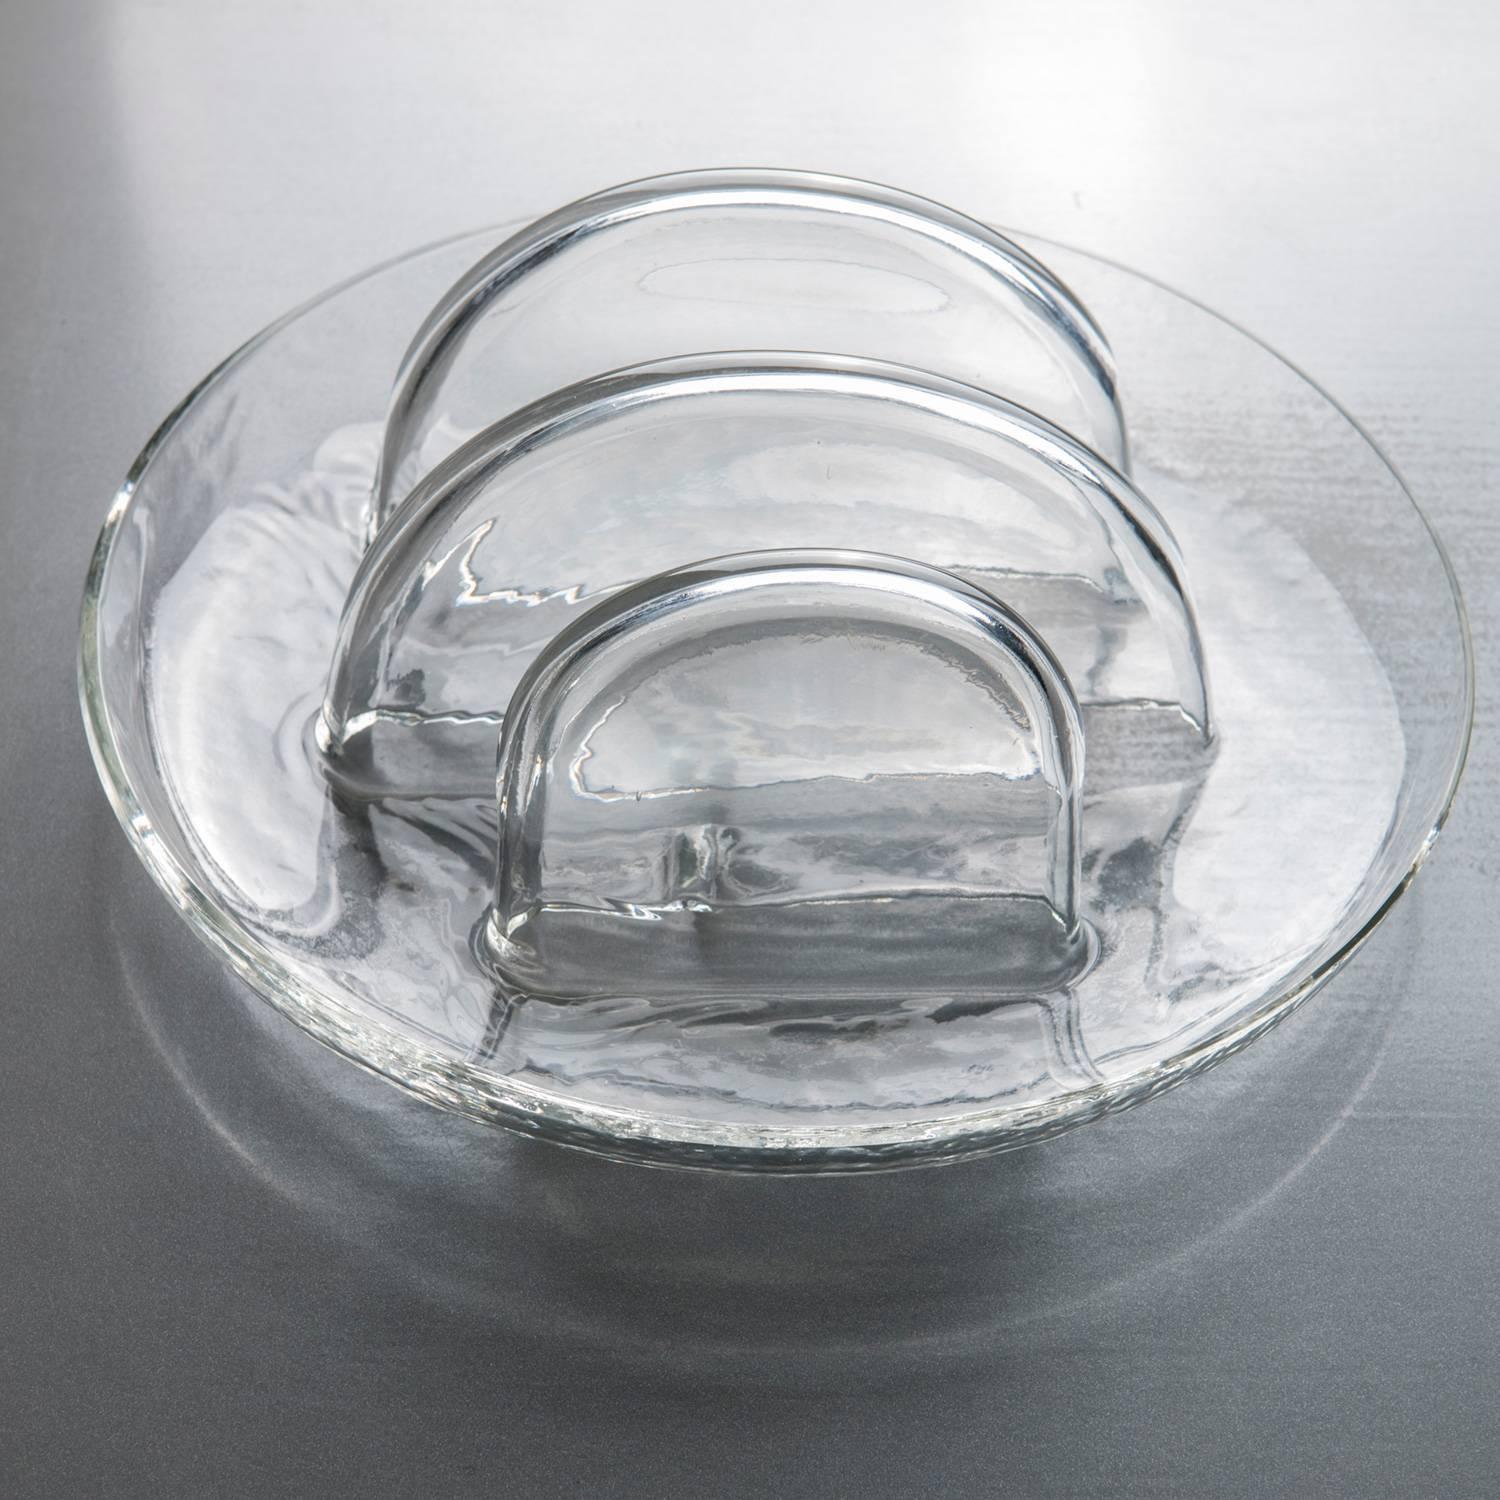 Murano glass centerpiece by Toni Zuccheri for VeArt.
Thick transparent glass and simple round shapes.
 